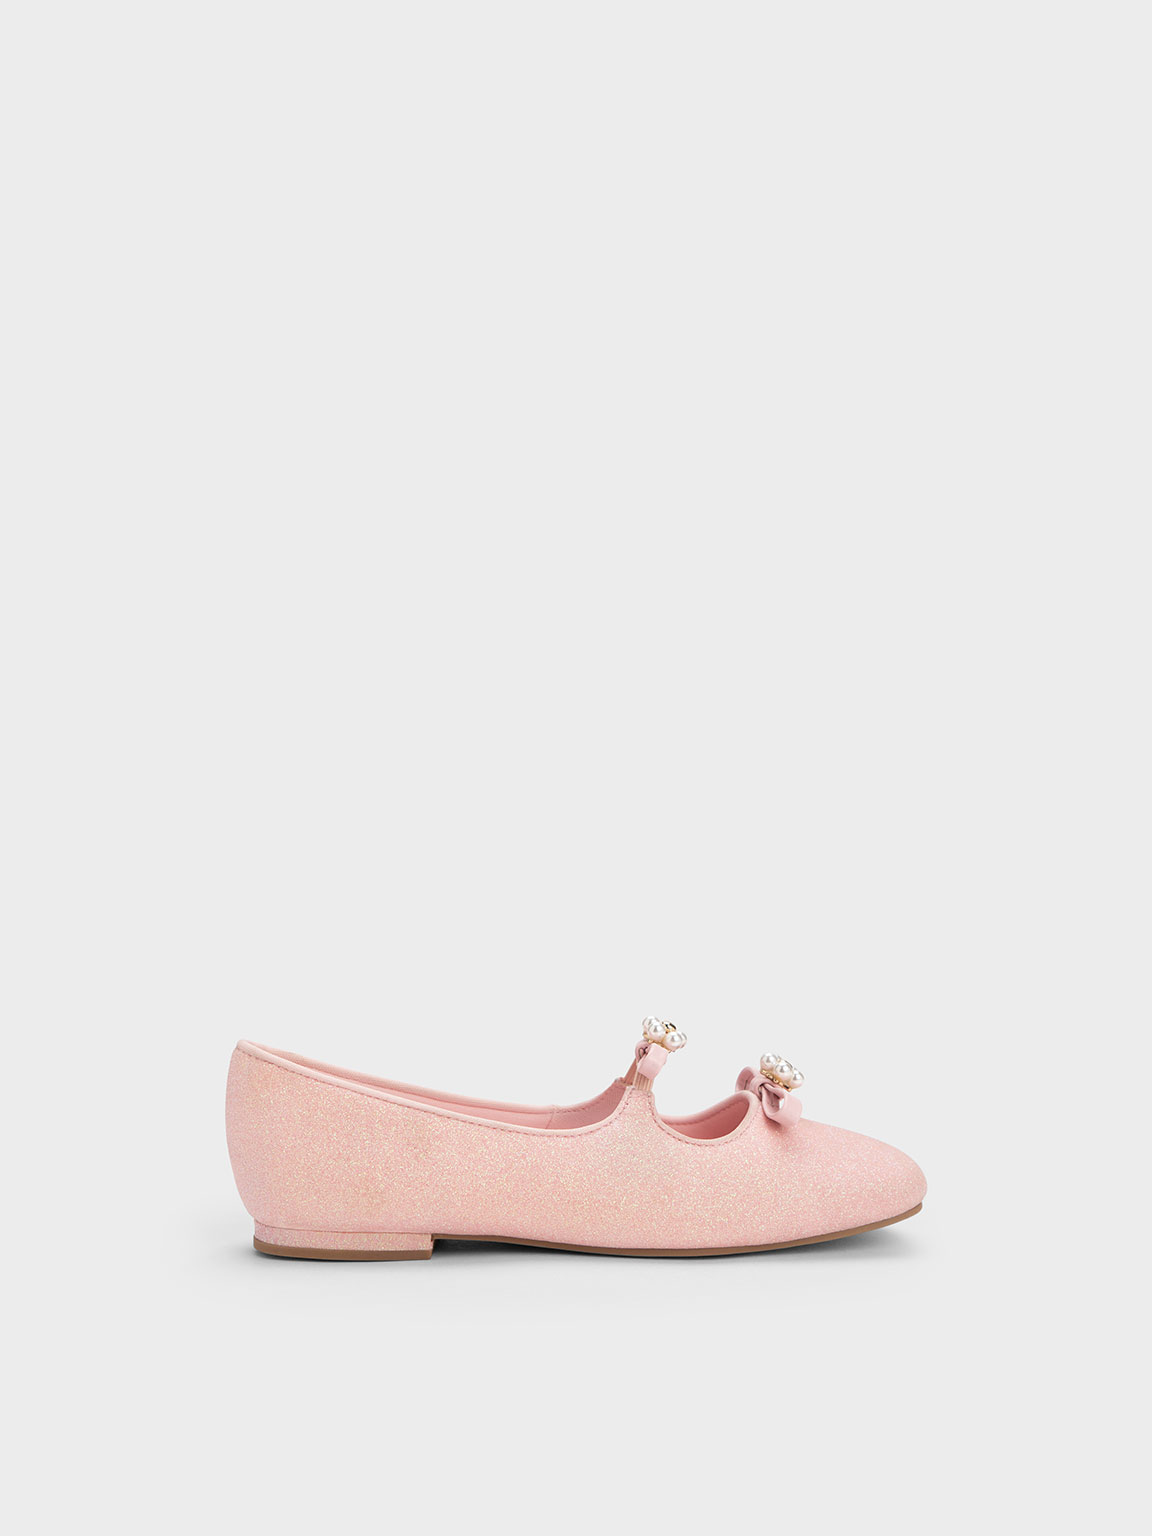 Charles & Keith - Girls' Floral Beaded Glittered Ballerinas In Light Pink